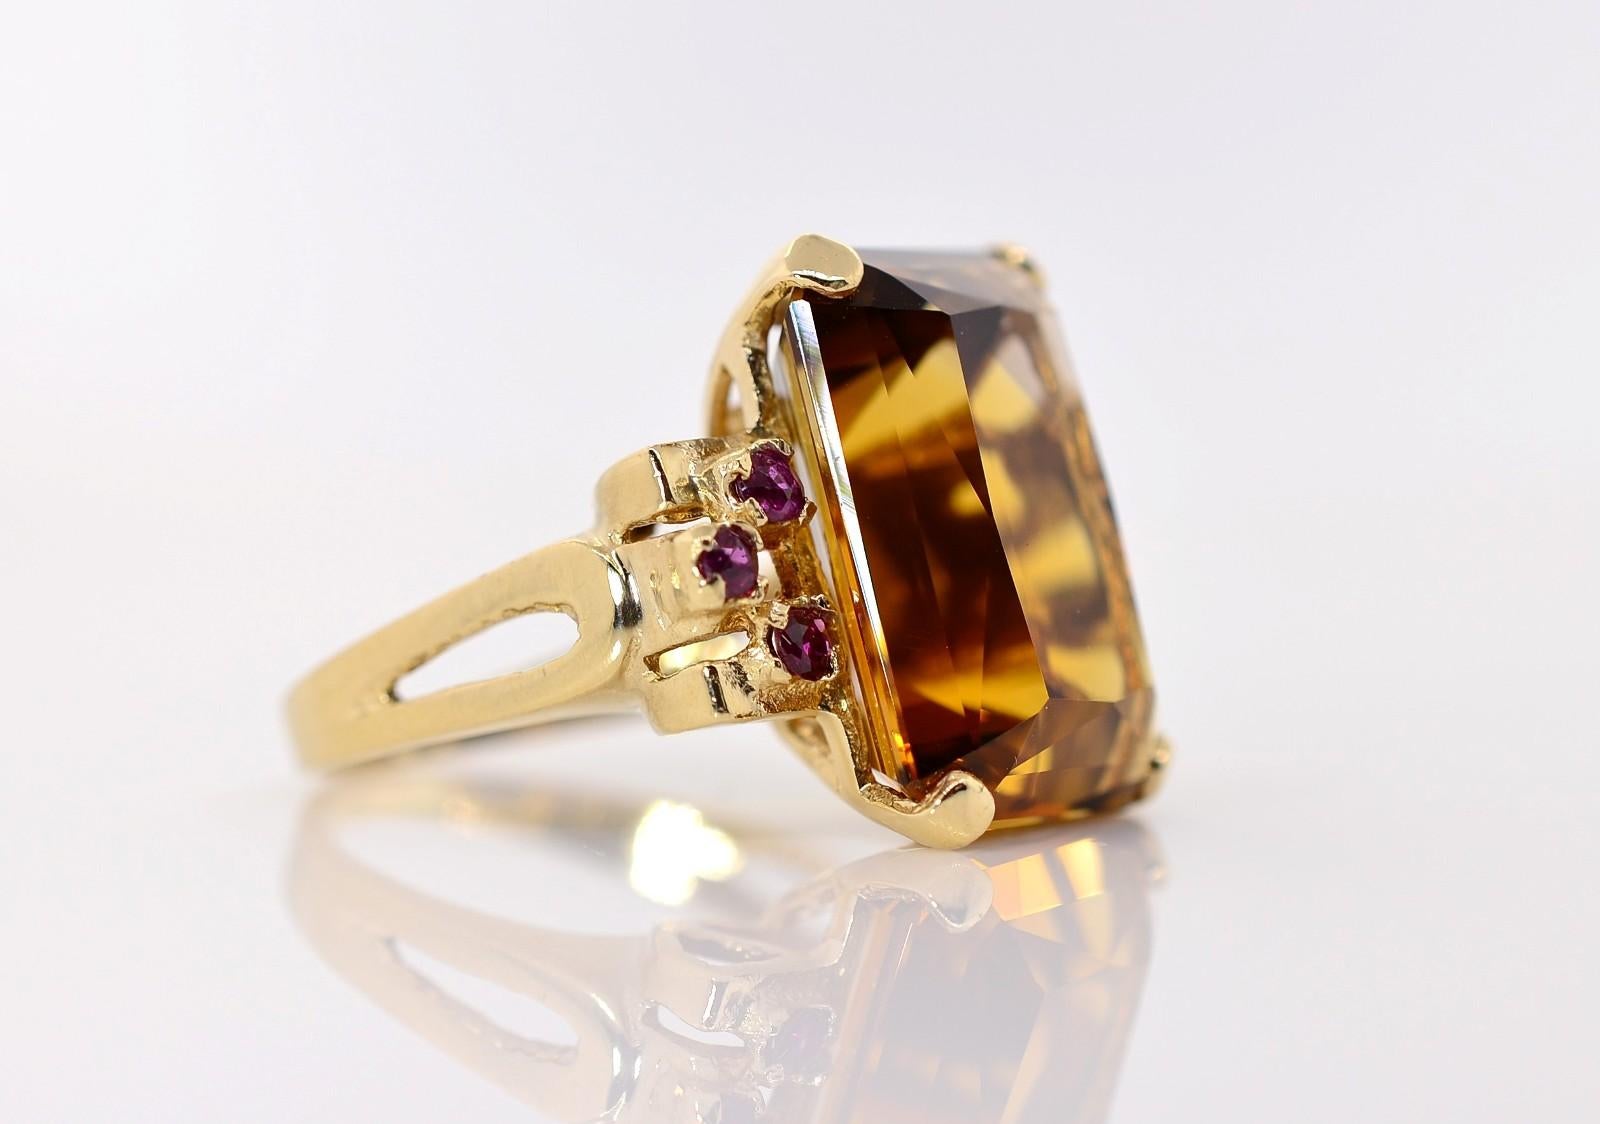 A sparkling Madeira Citrine quartz weighing 14.00 carat is the center piece of this lovely 1950's ring.  Three Burma Rubies flank each side of the Citrine in the 14KT yellow gold setting.  A split band adds understated ornamentation to this pretty